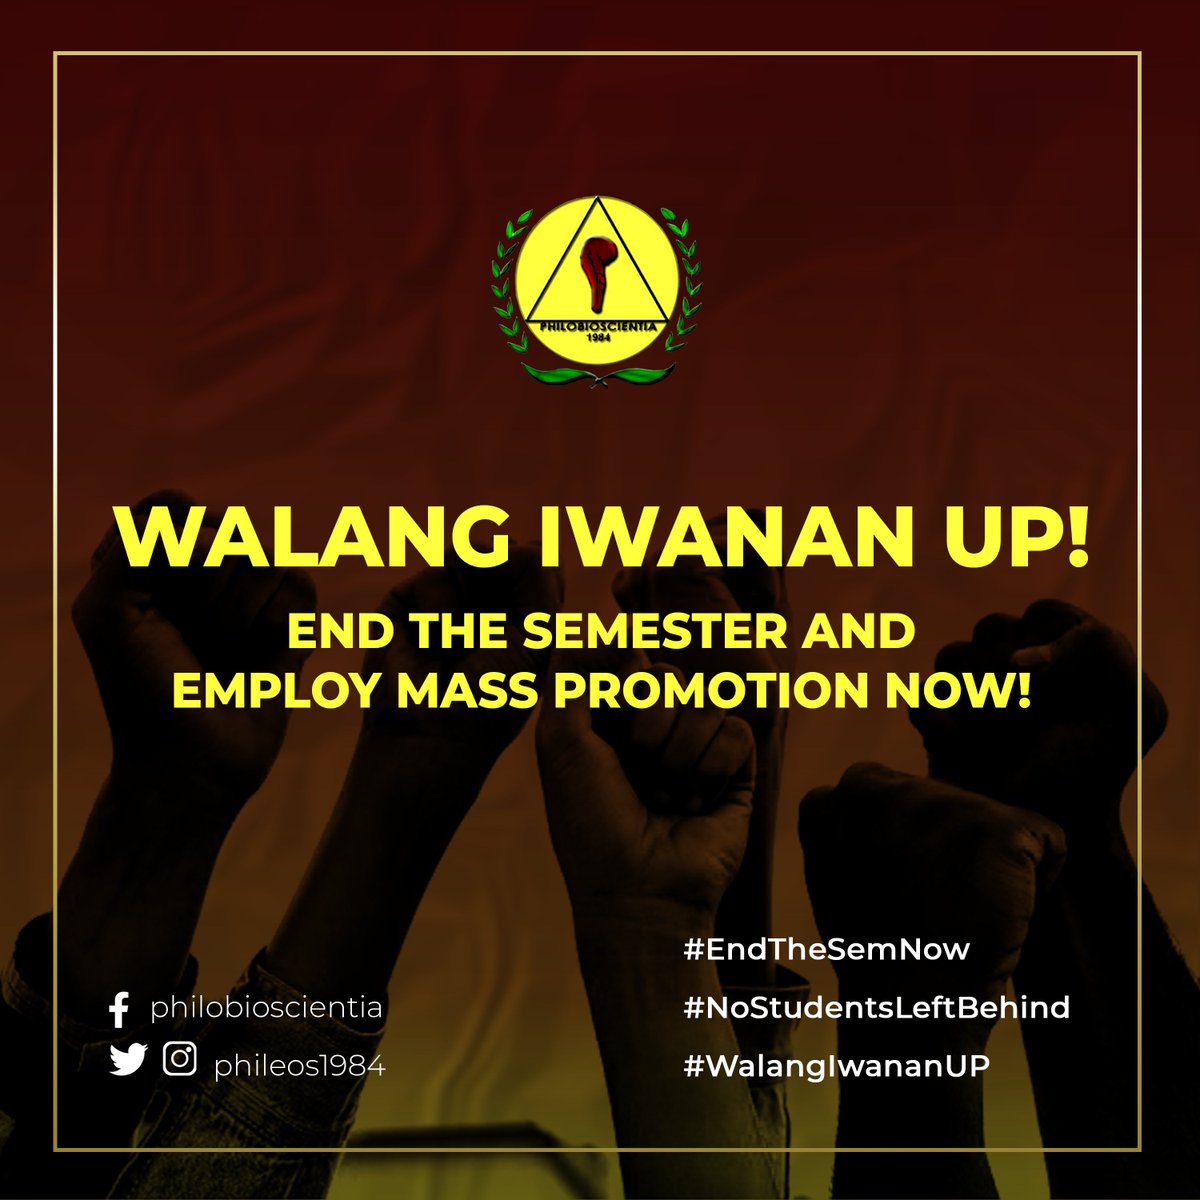 WALANG IWANAN UP!
END THE SEM AND EMPLOY MASS PROMOTION NOW!

The Collective Statement of the Resident Members of PHILOBIOSCIENTIA, The UPLB Life Sciences Society on calls for Ending the Semester and Employing Mass Promotion

#EndTheSemNow 
#NoStudentsLeftBehind 
#WalangIwananUP